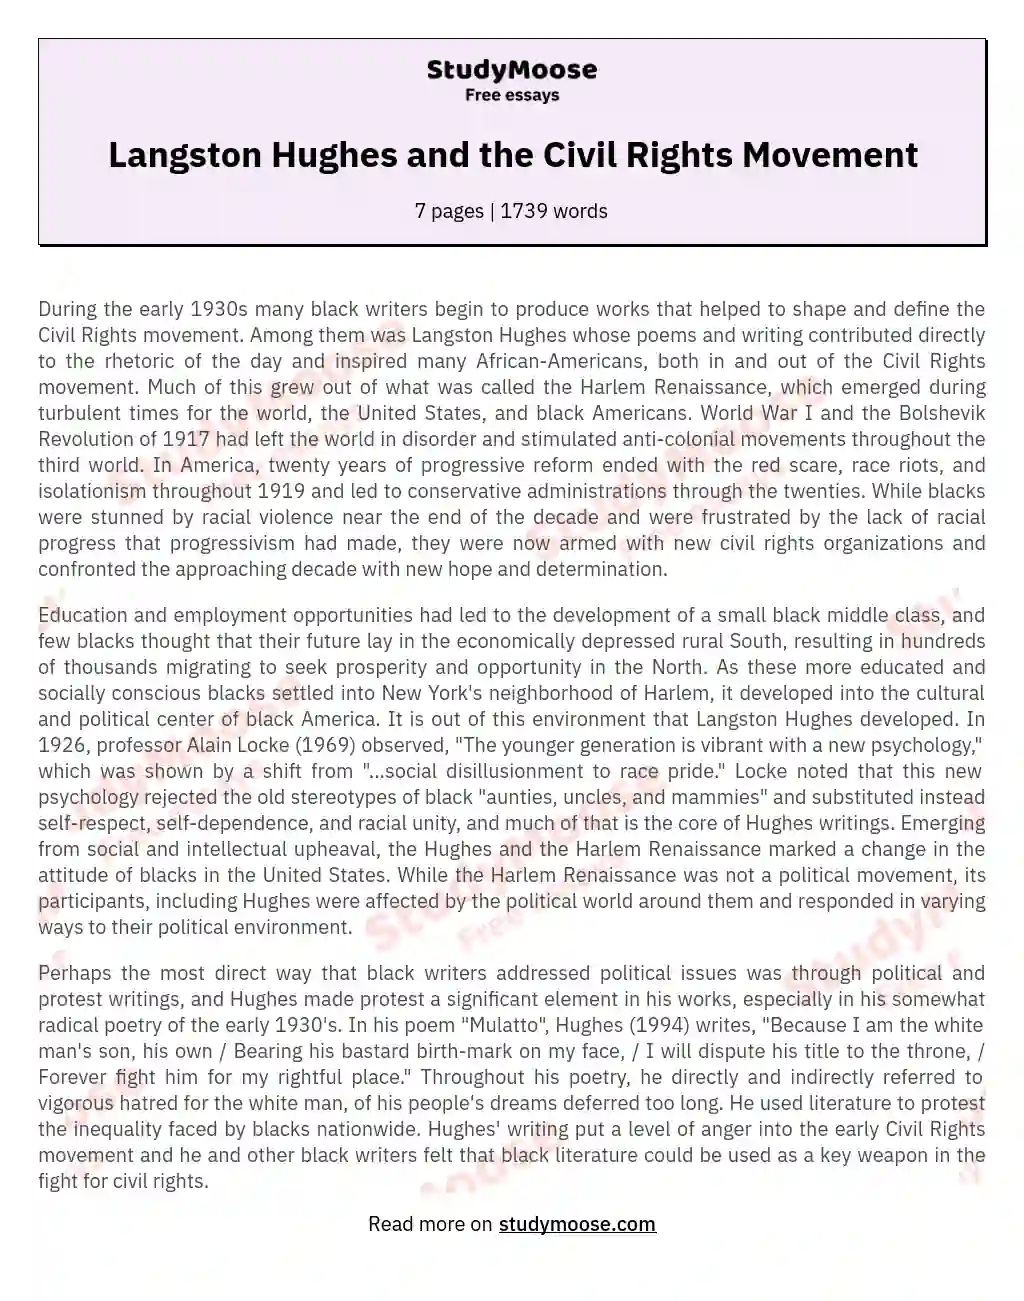 Langston Hughes and the Civil Rights Movement essay